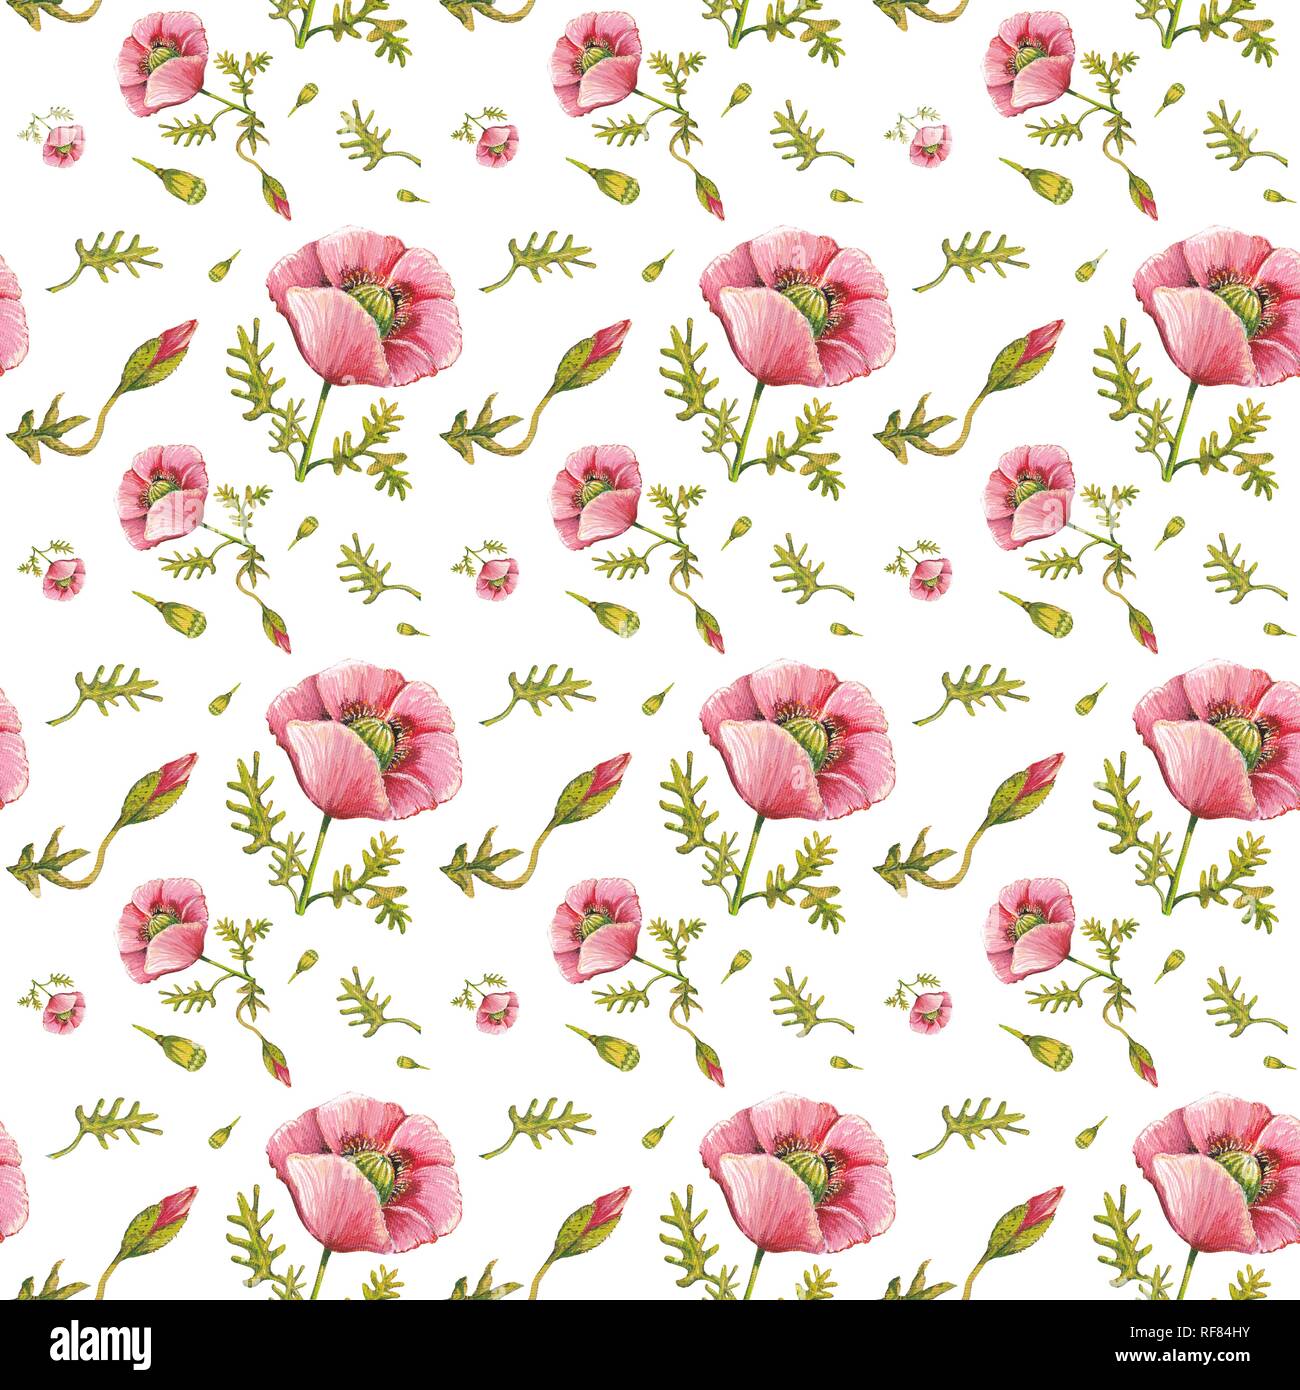 Wallpaper, wrapping paper, seamless pattern, poppies in pink, background white, Germany Stock Photo